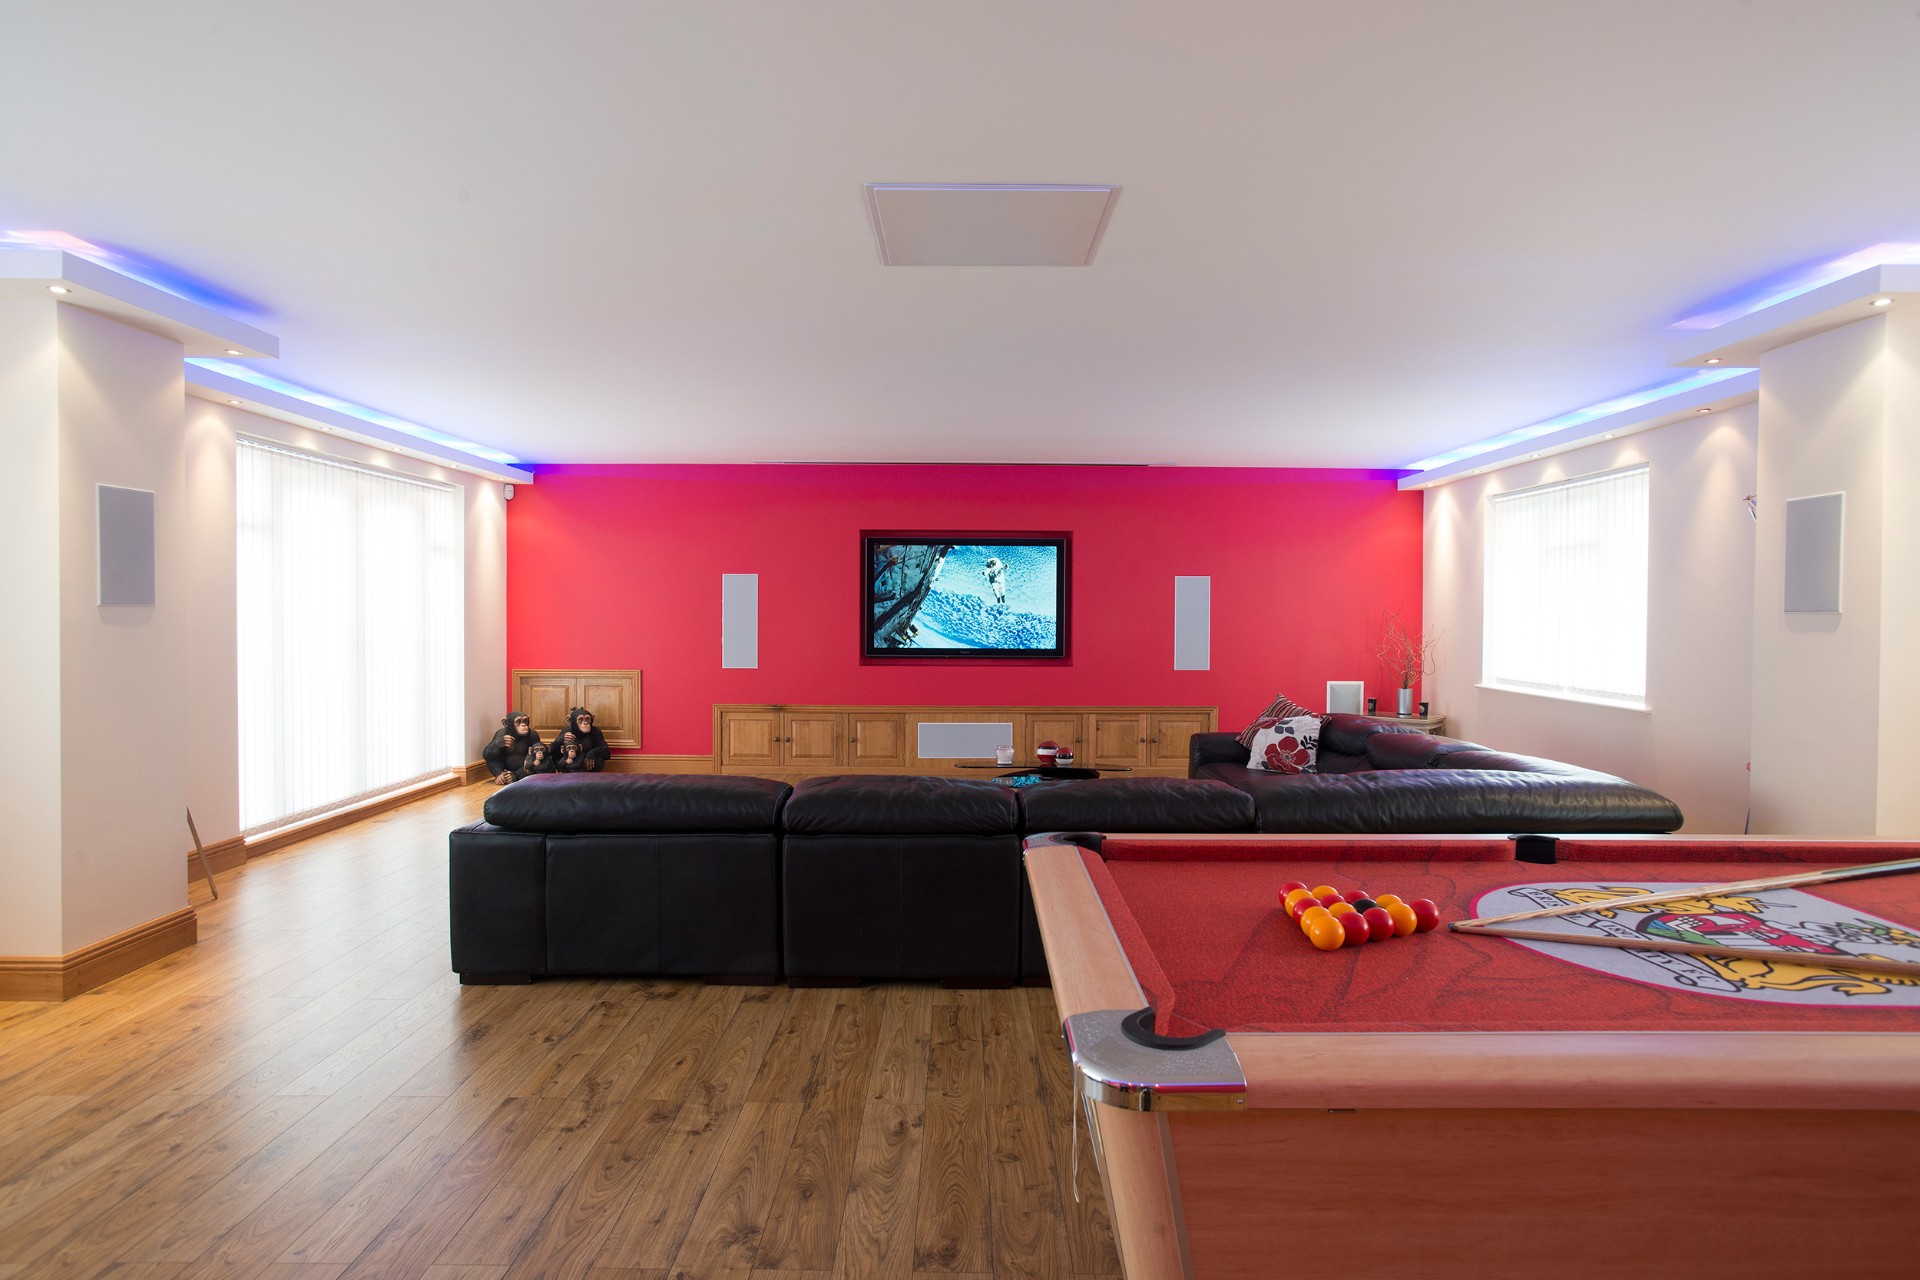 Home cinema system with integrated multiple screens throughout the house